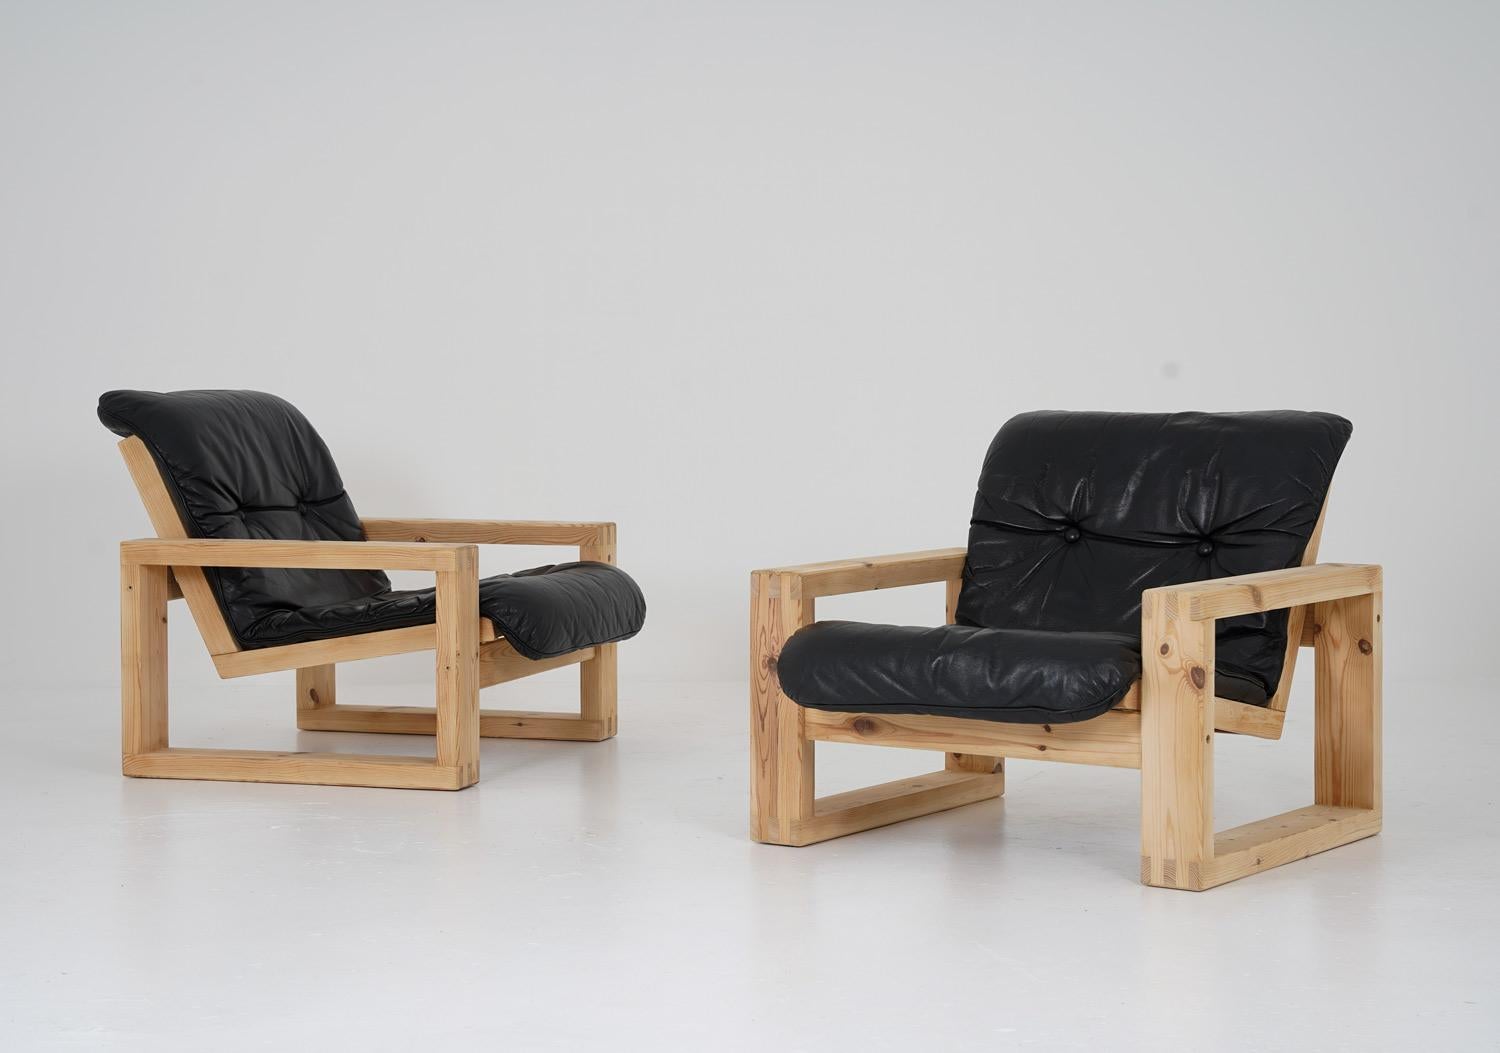 The lounge chairs by Yngve Ekström for Swedese are a rare find, a true gem of the robust pine furniture era that grew popular in Sweden in the late 1960s. These chairs are a testament to the exceptional design and craftsmanship of that time, with